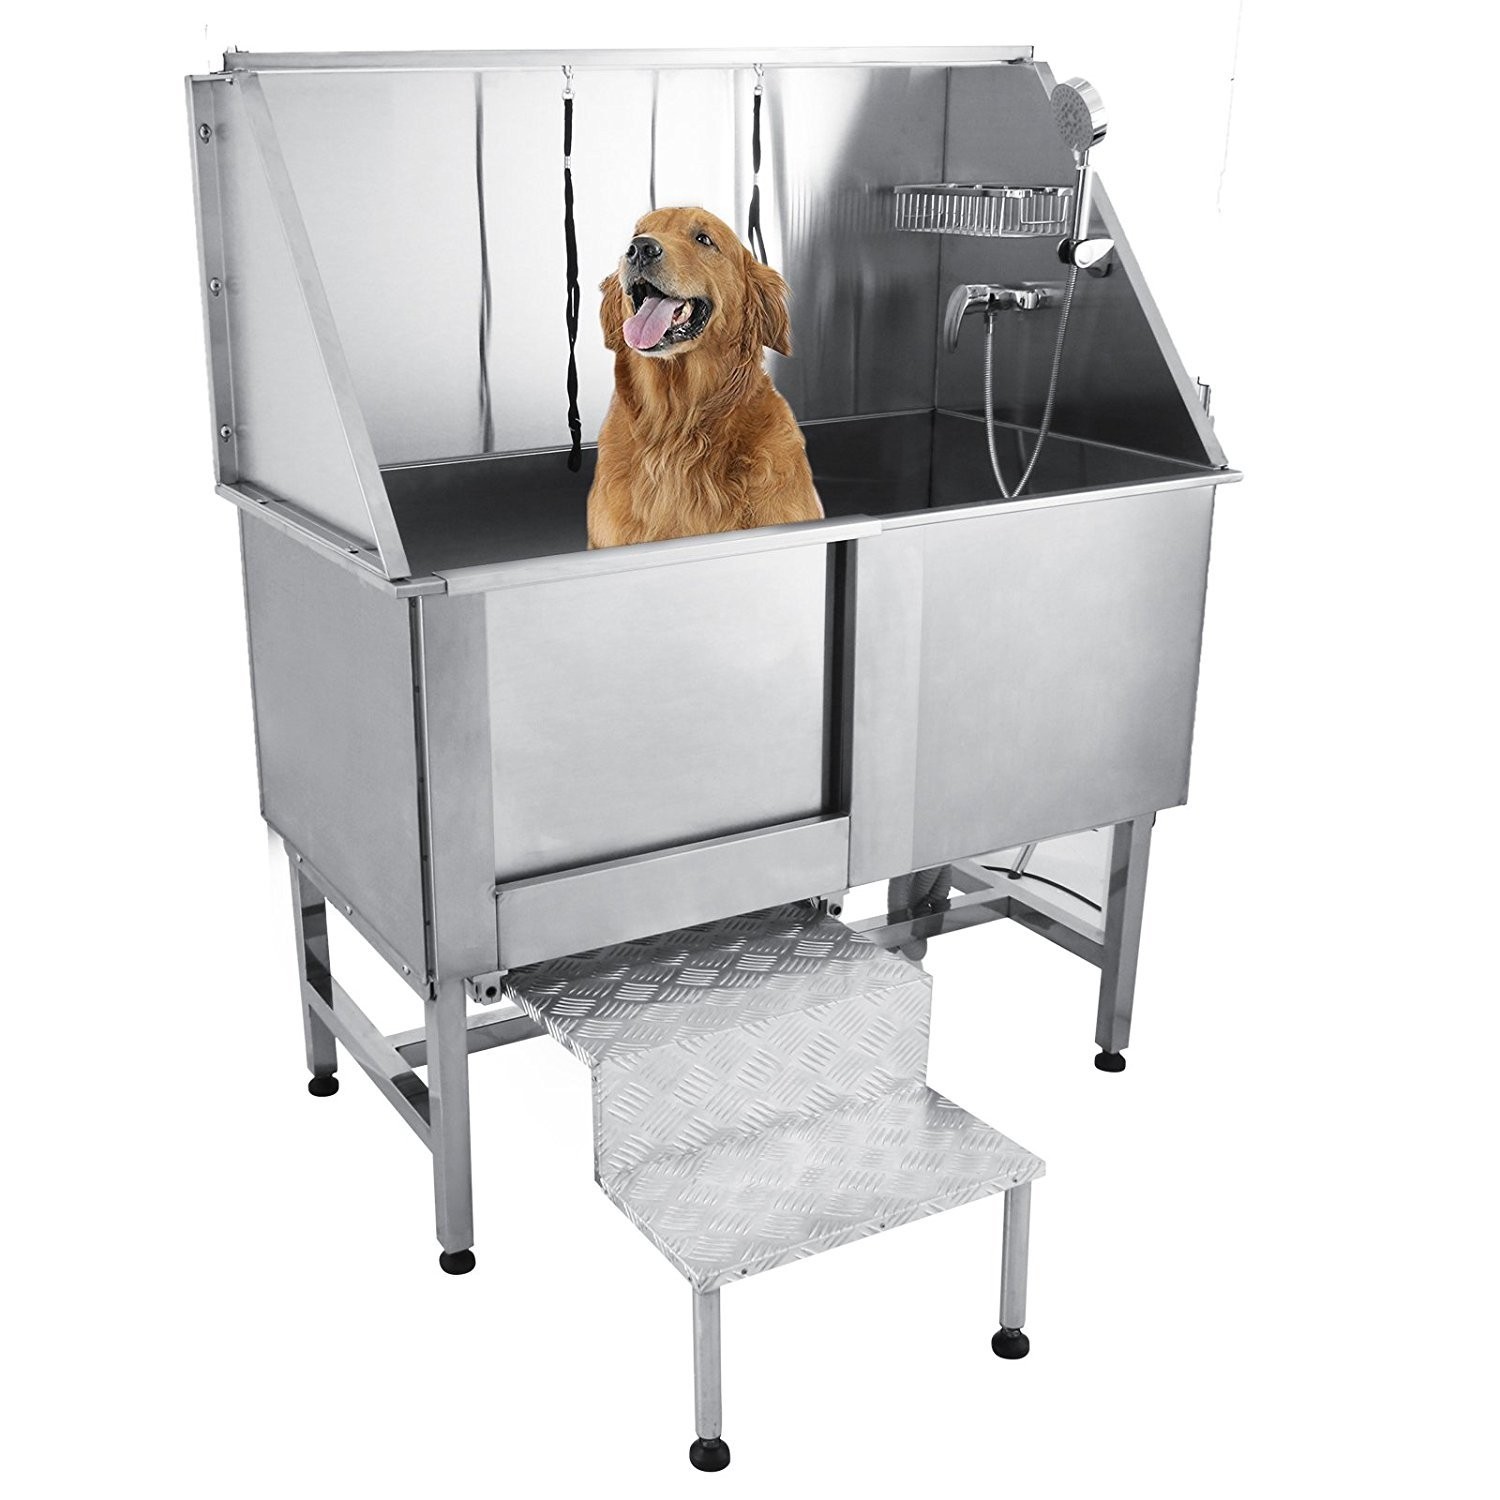 Top Grooming Tub For Dogs of all time Learn more here 